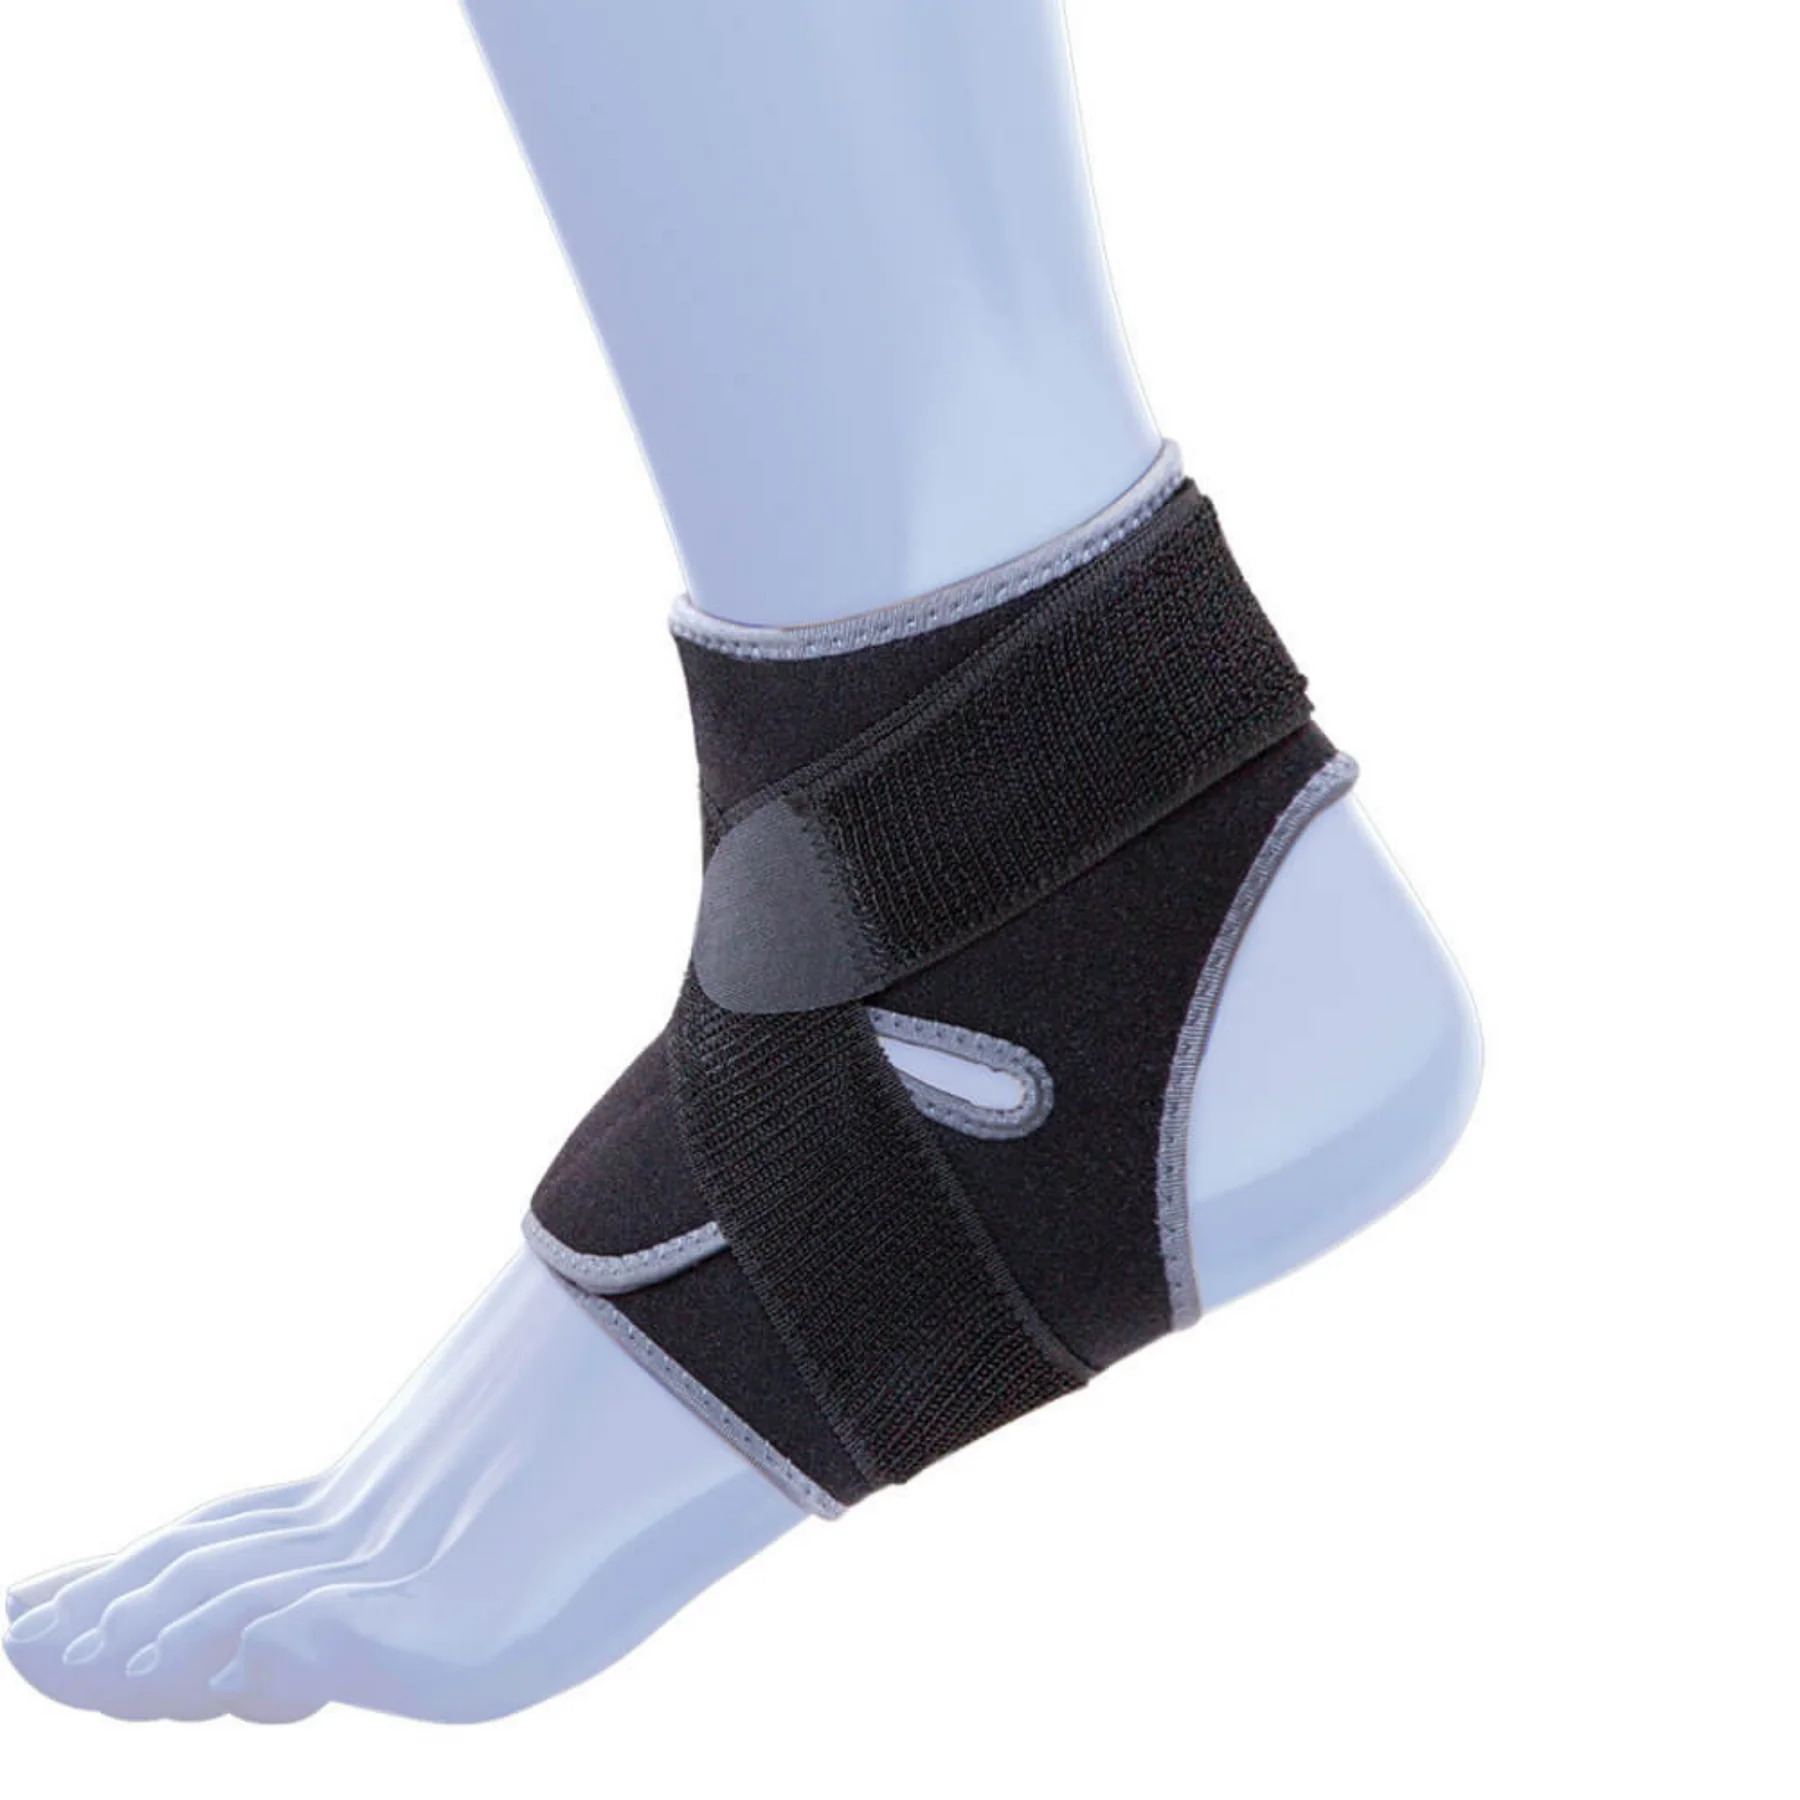 Kedley Advanced Ankle Support - Universal Size 1pc